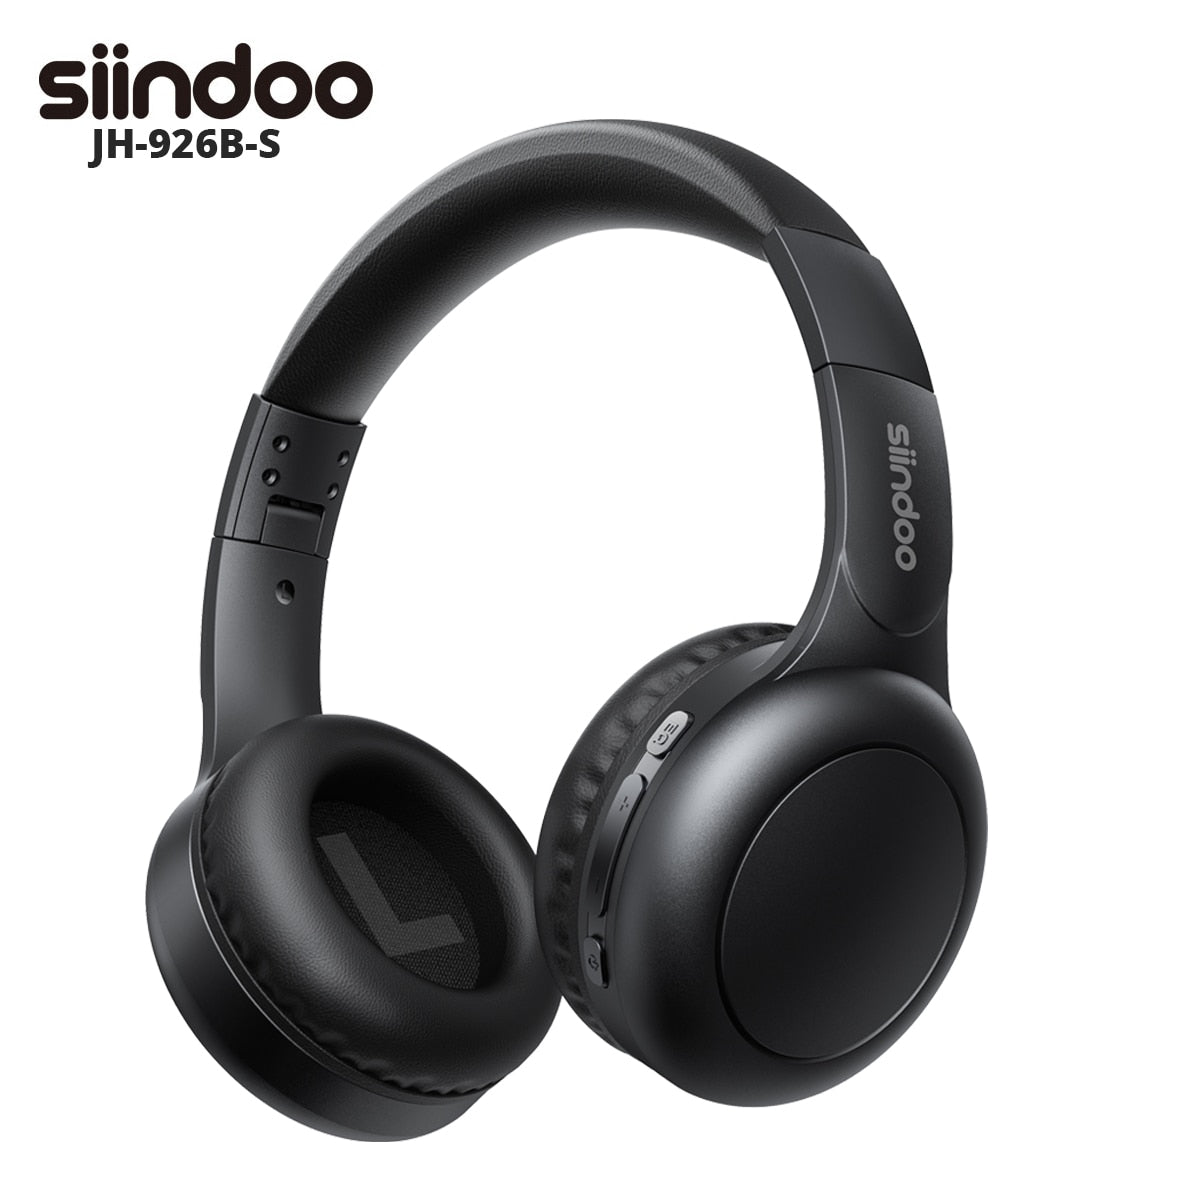 Siindoo JH-926B Wireless Bluetooth Headphones Foldable Stereo Earphones Super Bass Noise Reduction Mic For Adult Kids for TV PC